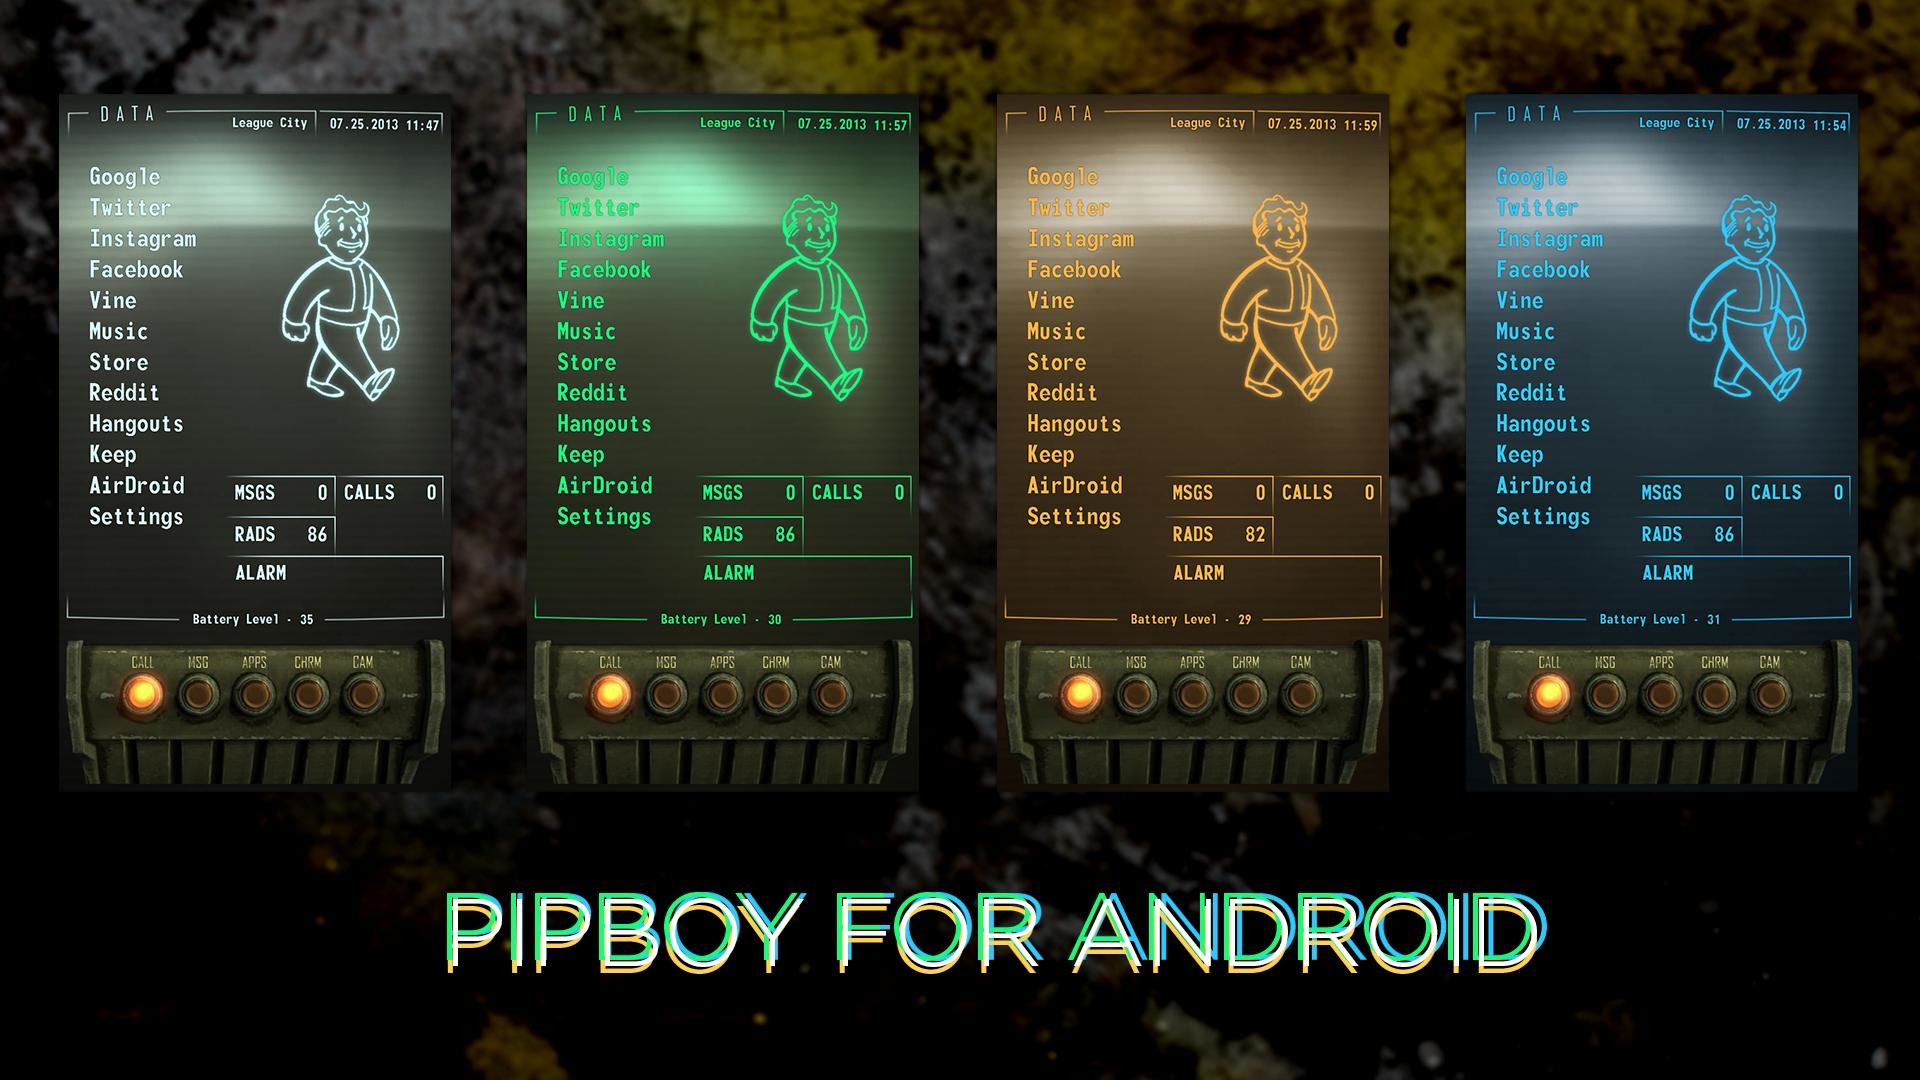 1920x1080 I give you my improved Fallout PipBoy Android theme!